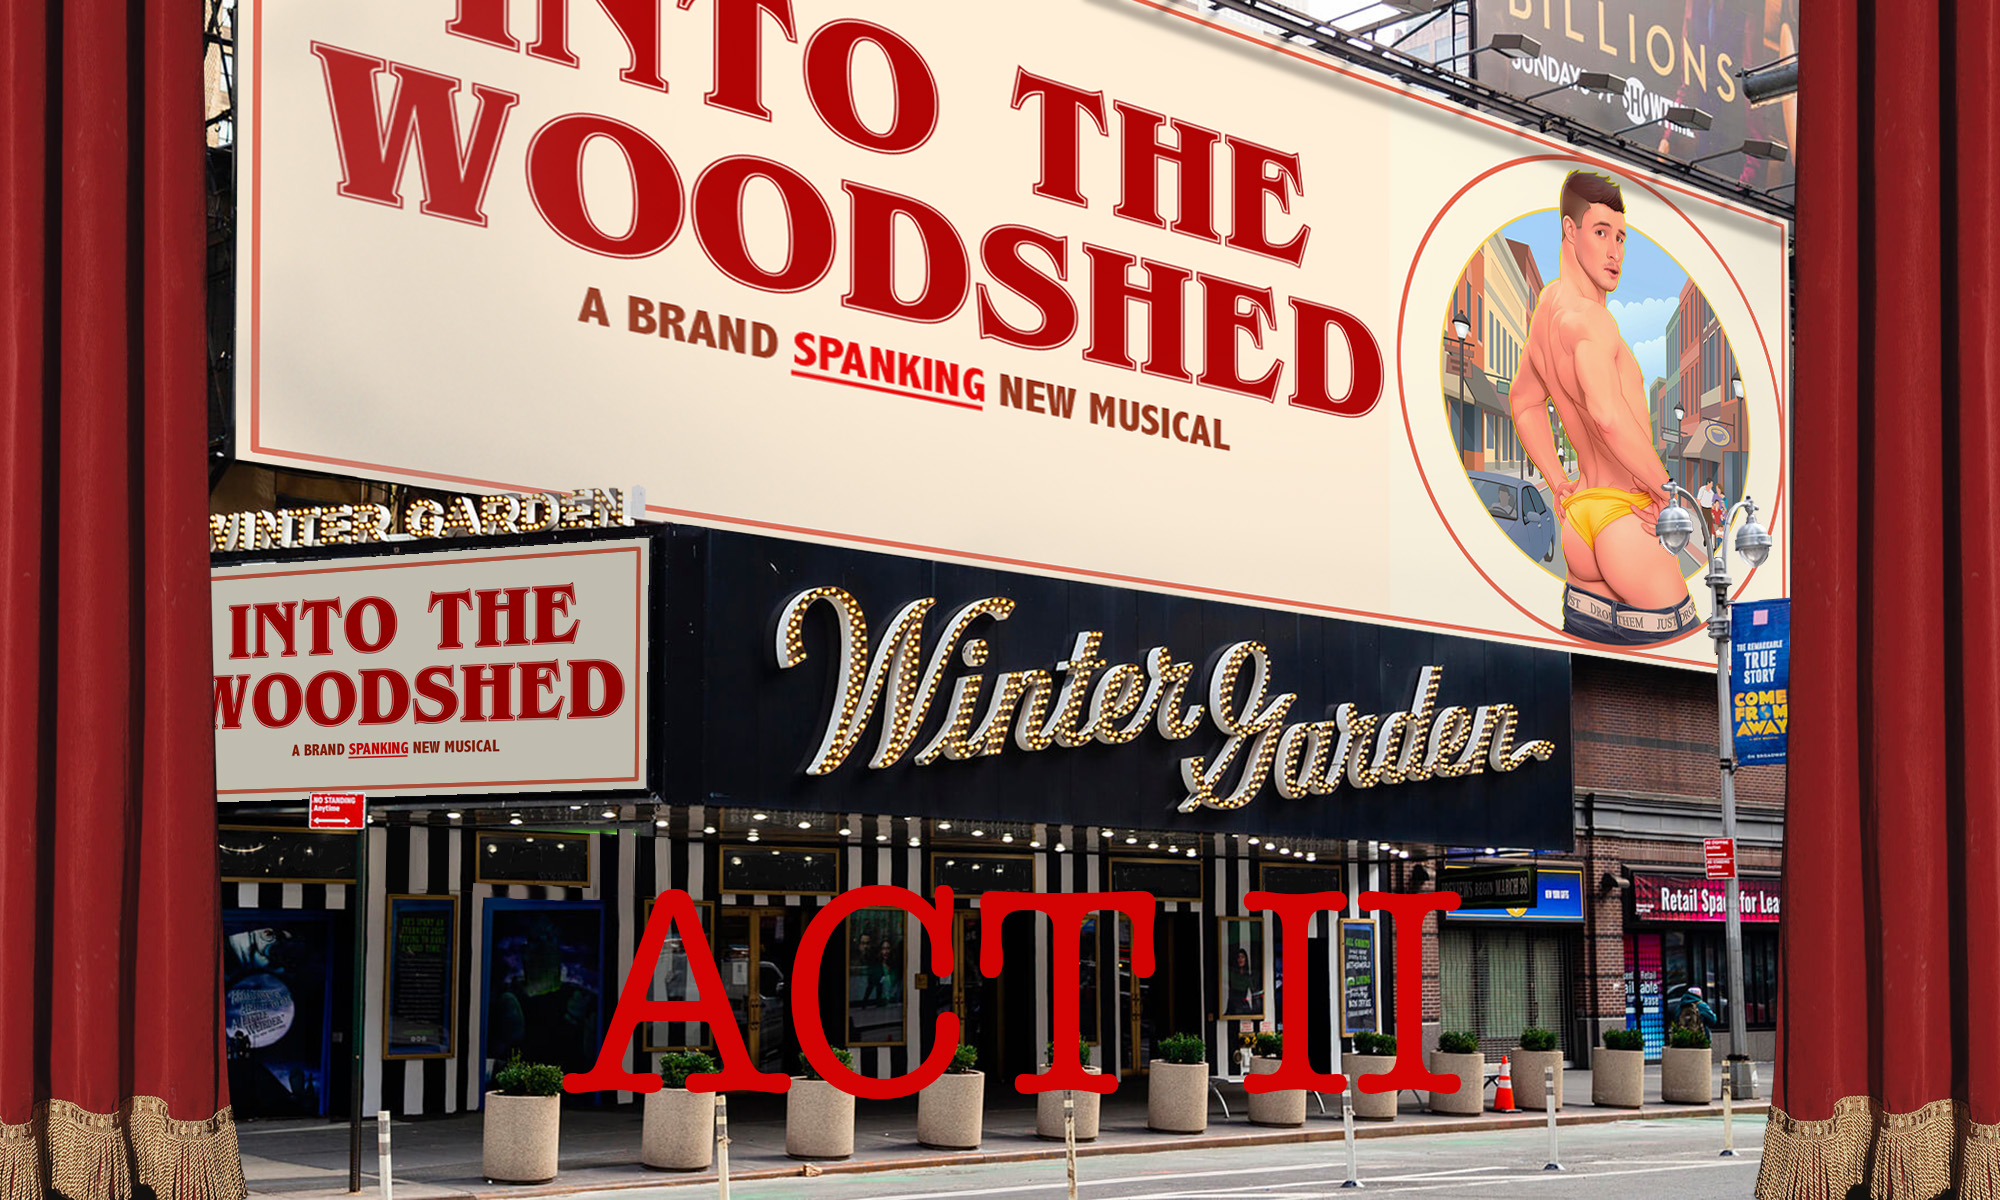 Woodshed Spanking Movies - Into The Woodshed a Brand Spanking new Musical by Mark â€“ Act 2 - Jock Spank  - Male Spanking